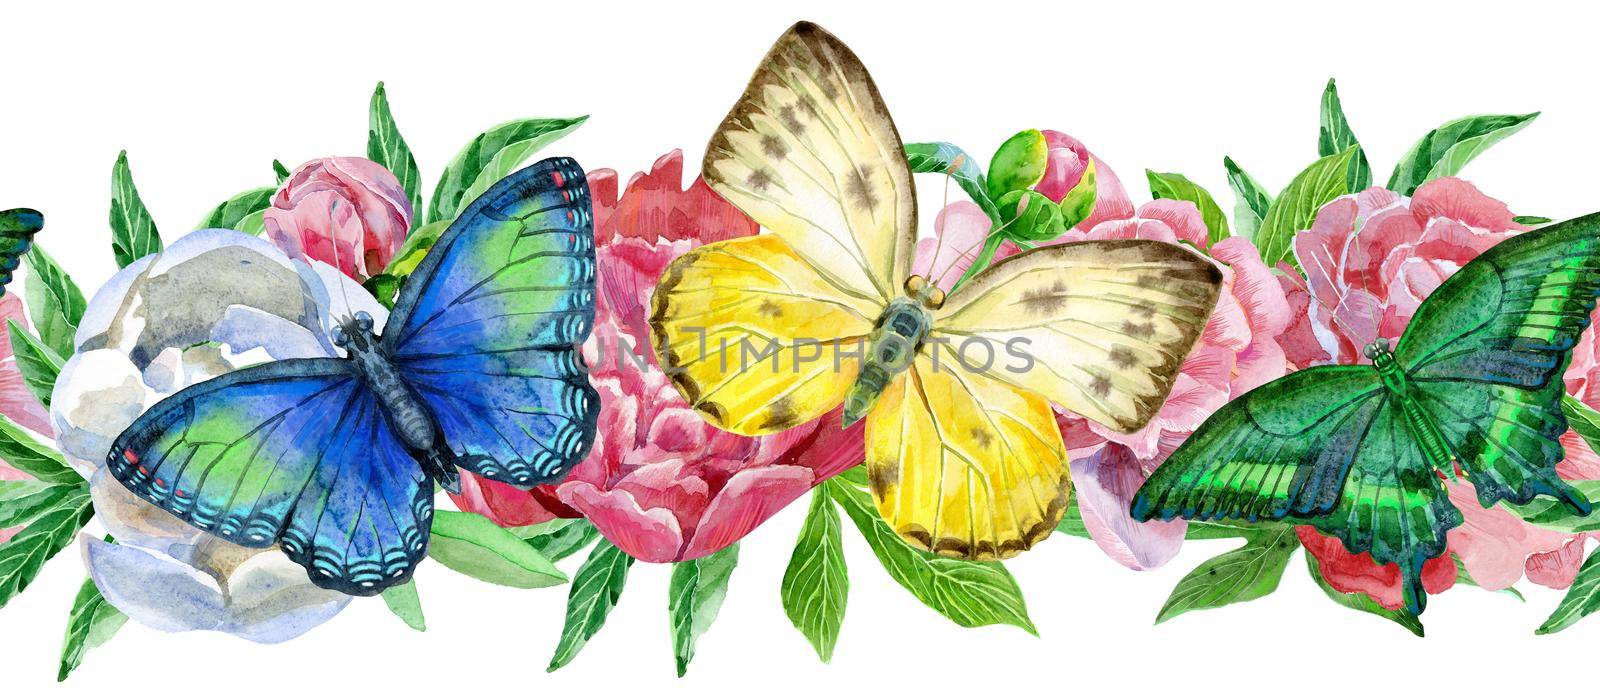 Seamless floral border with colorful butterflies and peonies on white background by NataOmsk